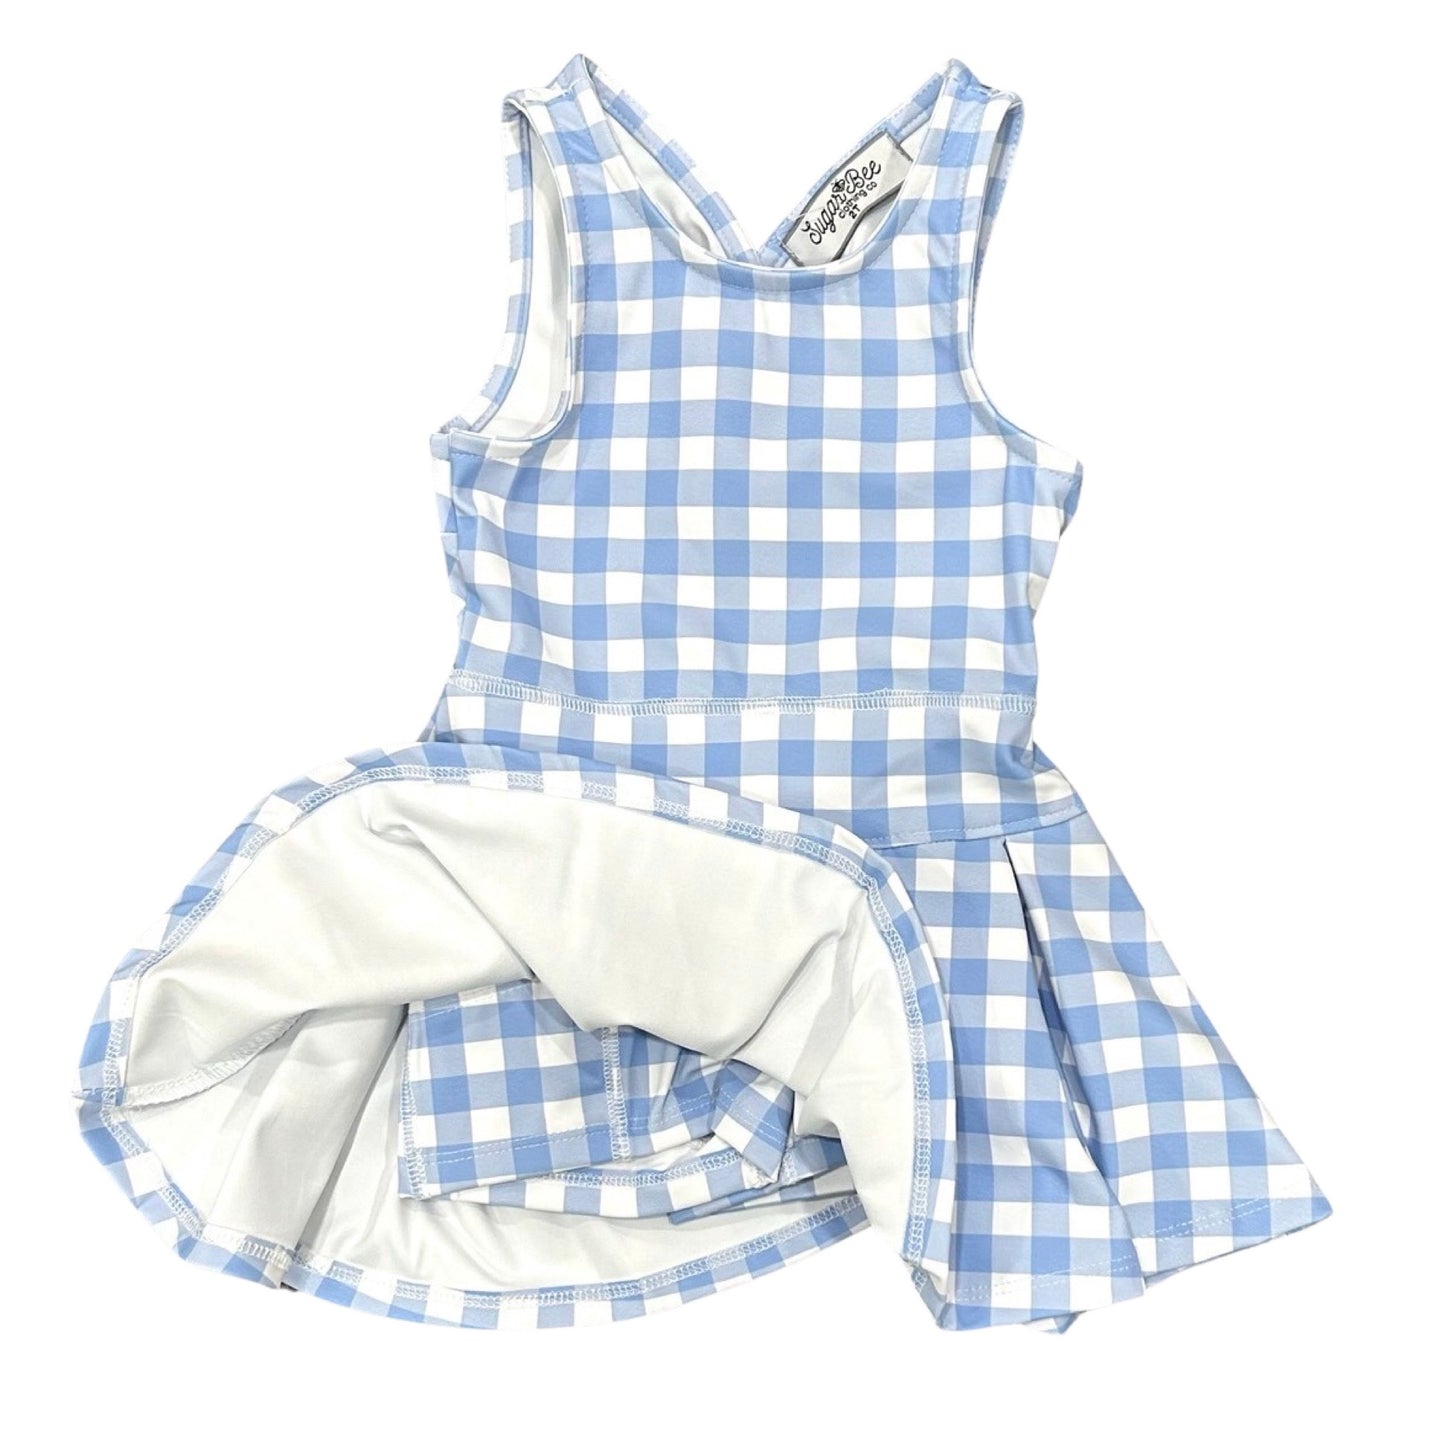 Pleated Tennis Dress - French Blue Gingham